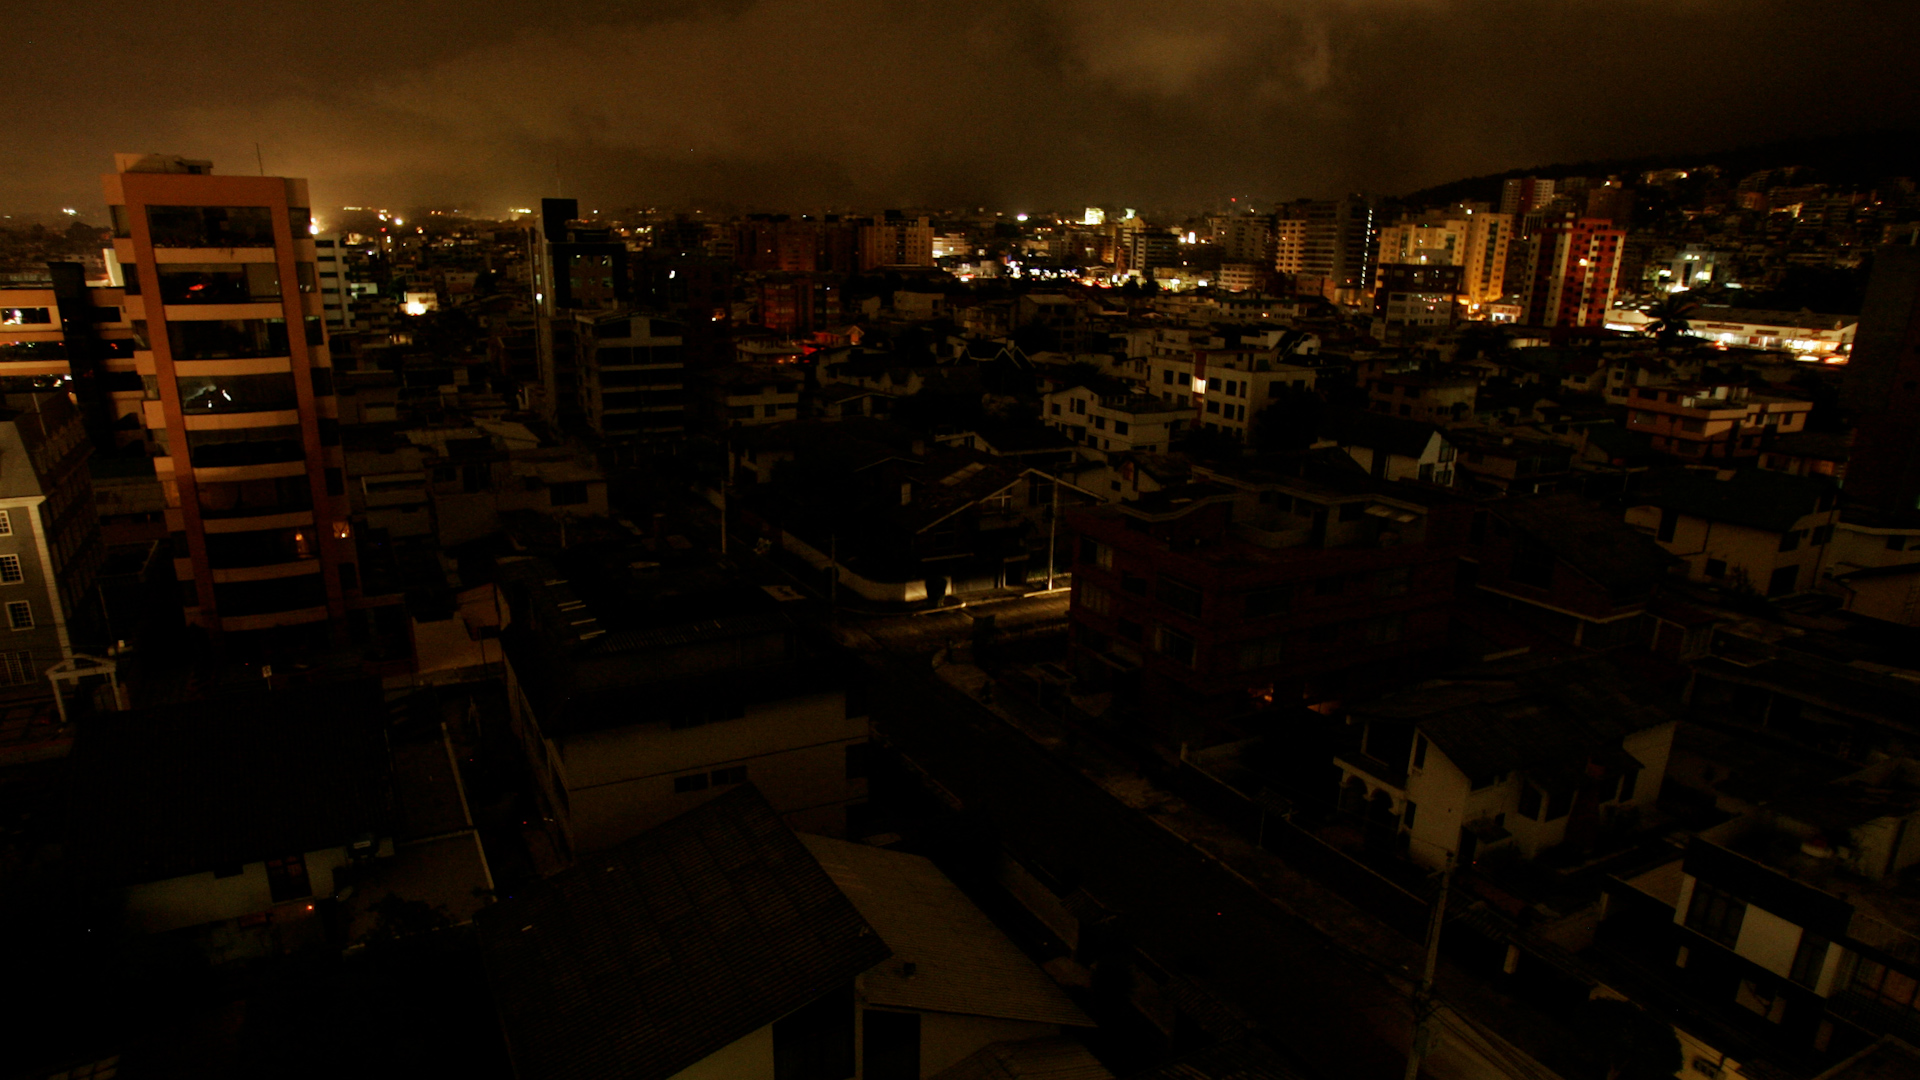 Ecuador has nearly restored power after a national blackout impacted hospitals, homes and transit brought the country into darkness.